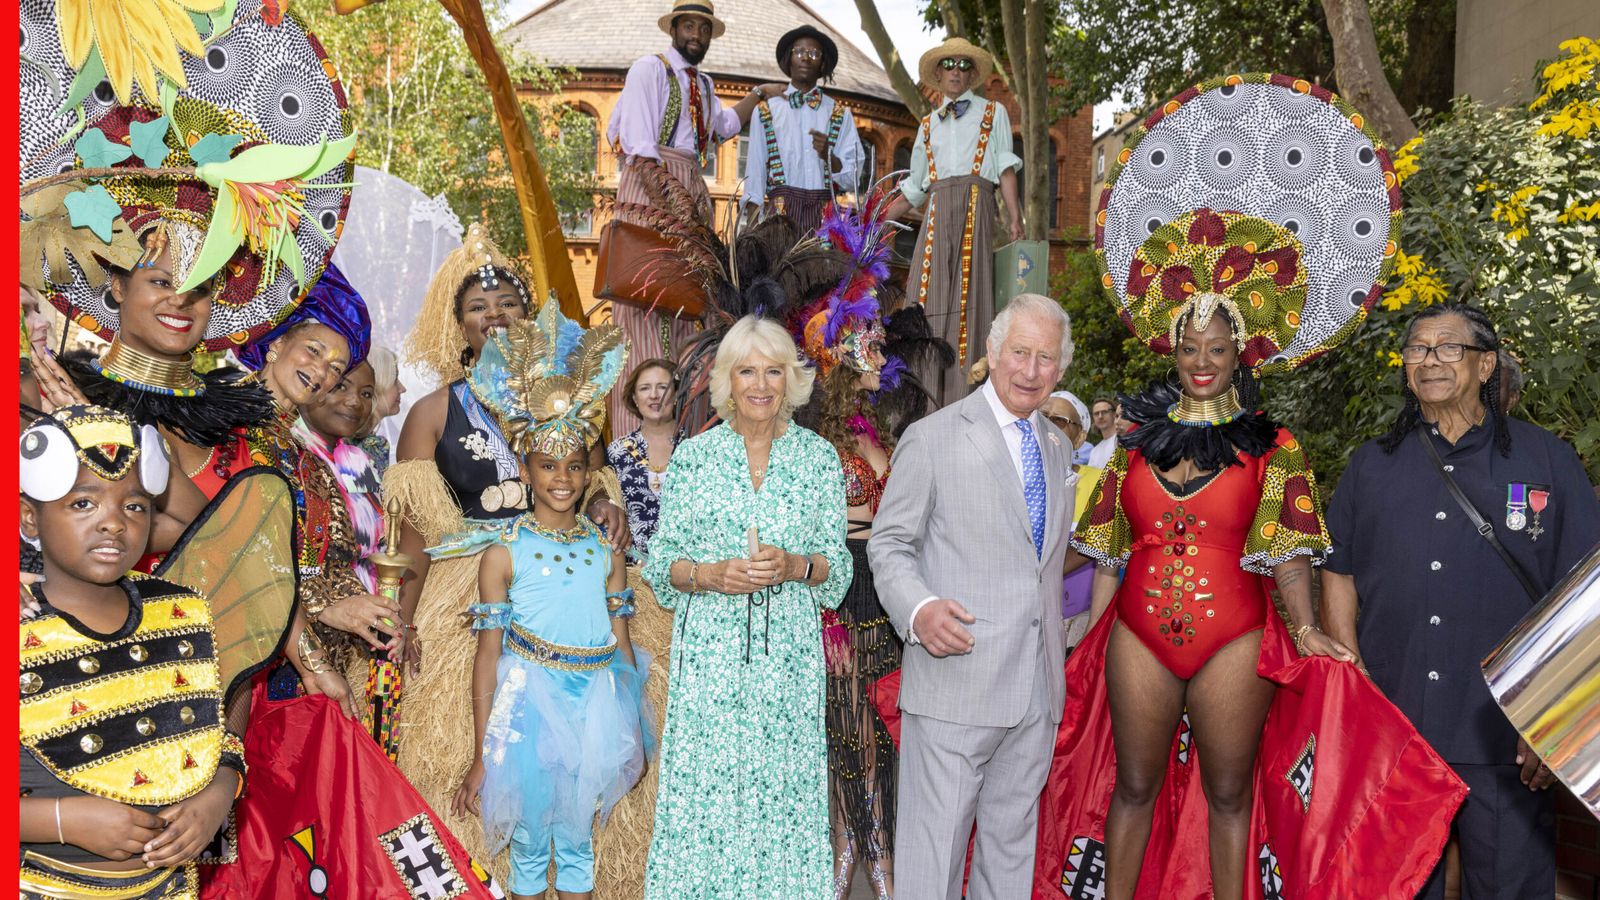 Prince Charles tries the steel drums at Notting Hill Carnival